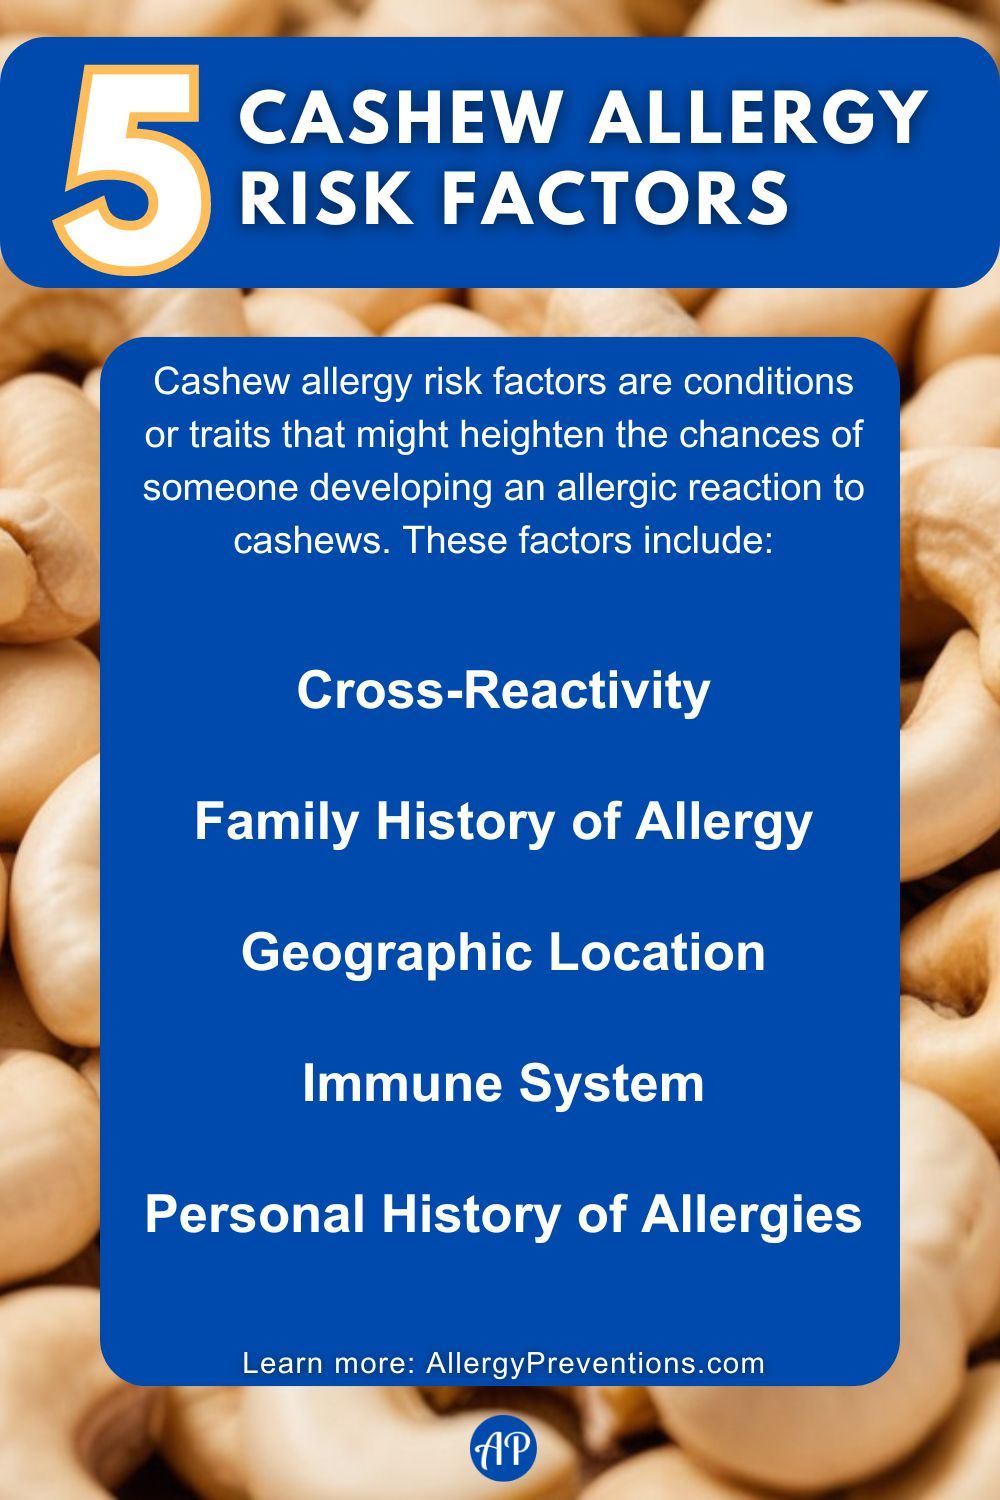 Cashew Allergy Risk Factors infographic. Cashew allergy risk factors are conditions or traits that might heighten the chances of someone developing an allergic reaction to cashews. These factors include: Cross-Reactivity, Family History of Allergy, Geographic Location, Immune System, and Personal History of Allergies.